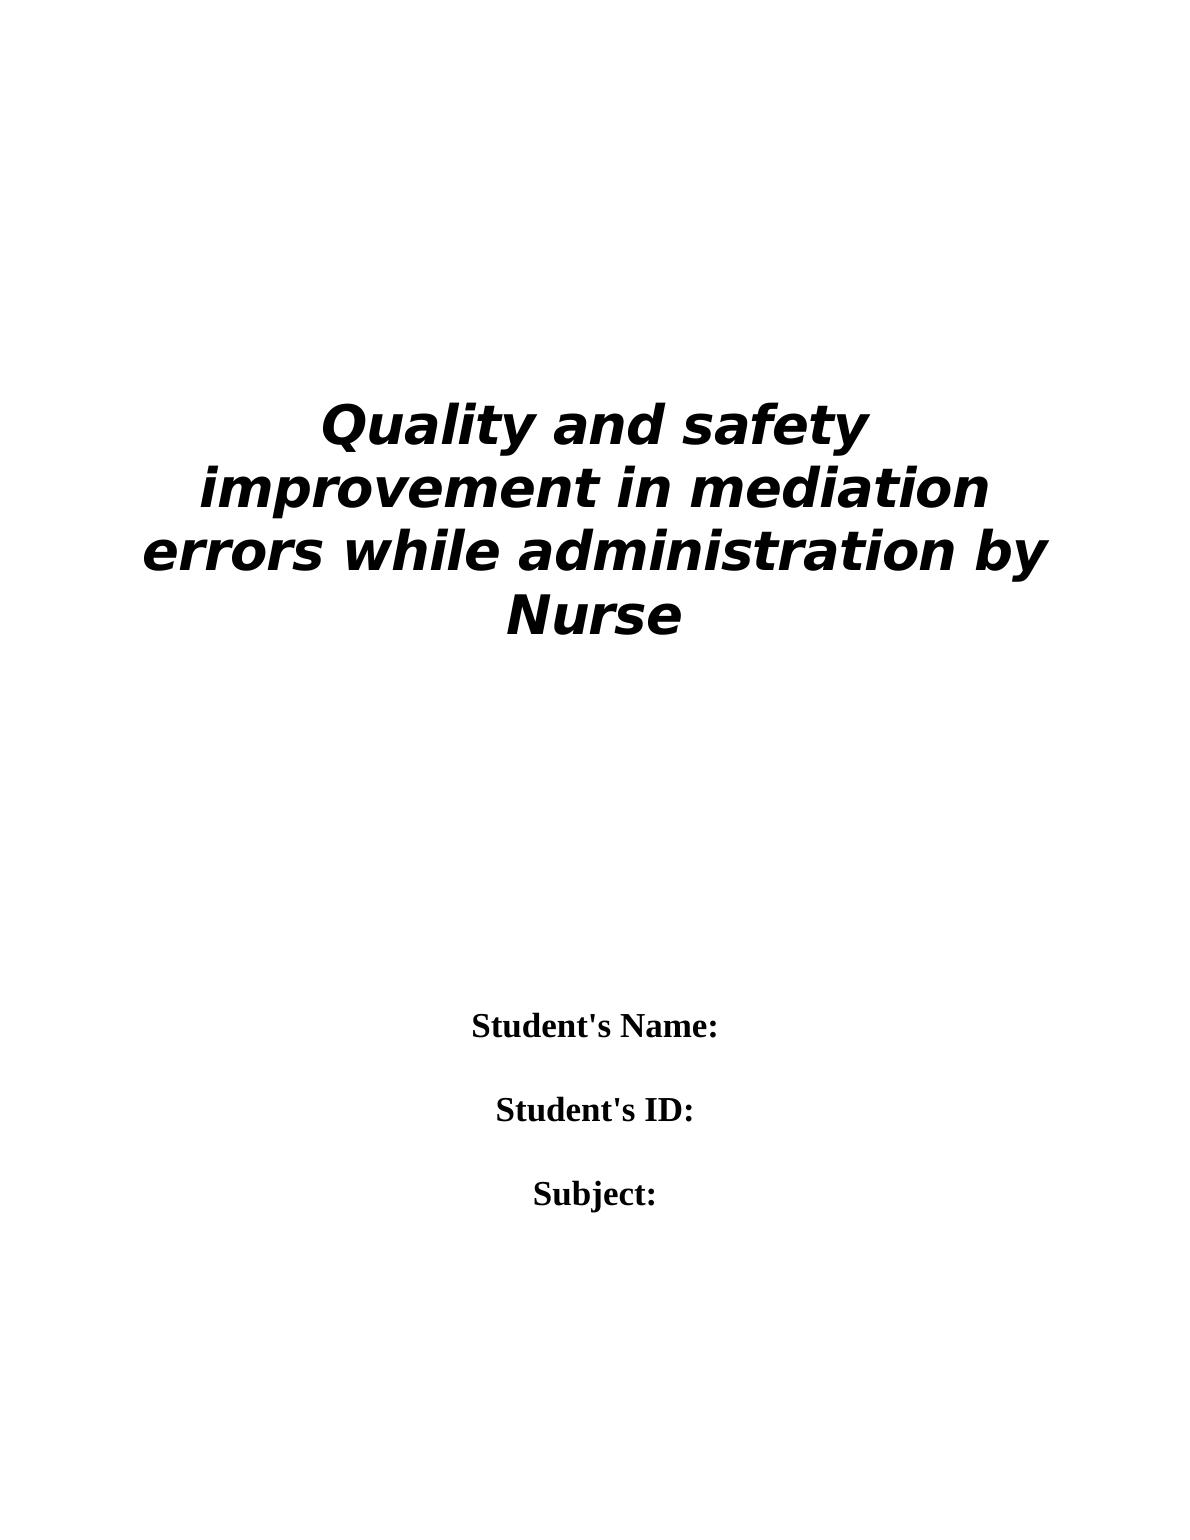 Quality and safety improvement in mediation errors while administration by Nurse_1